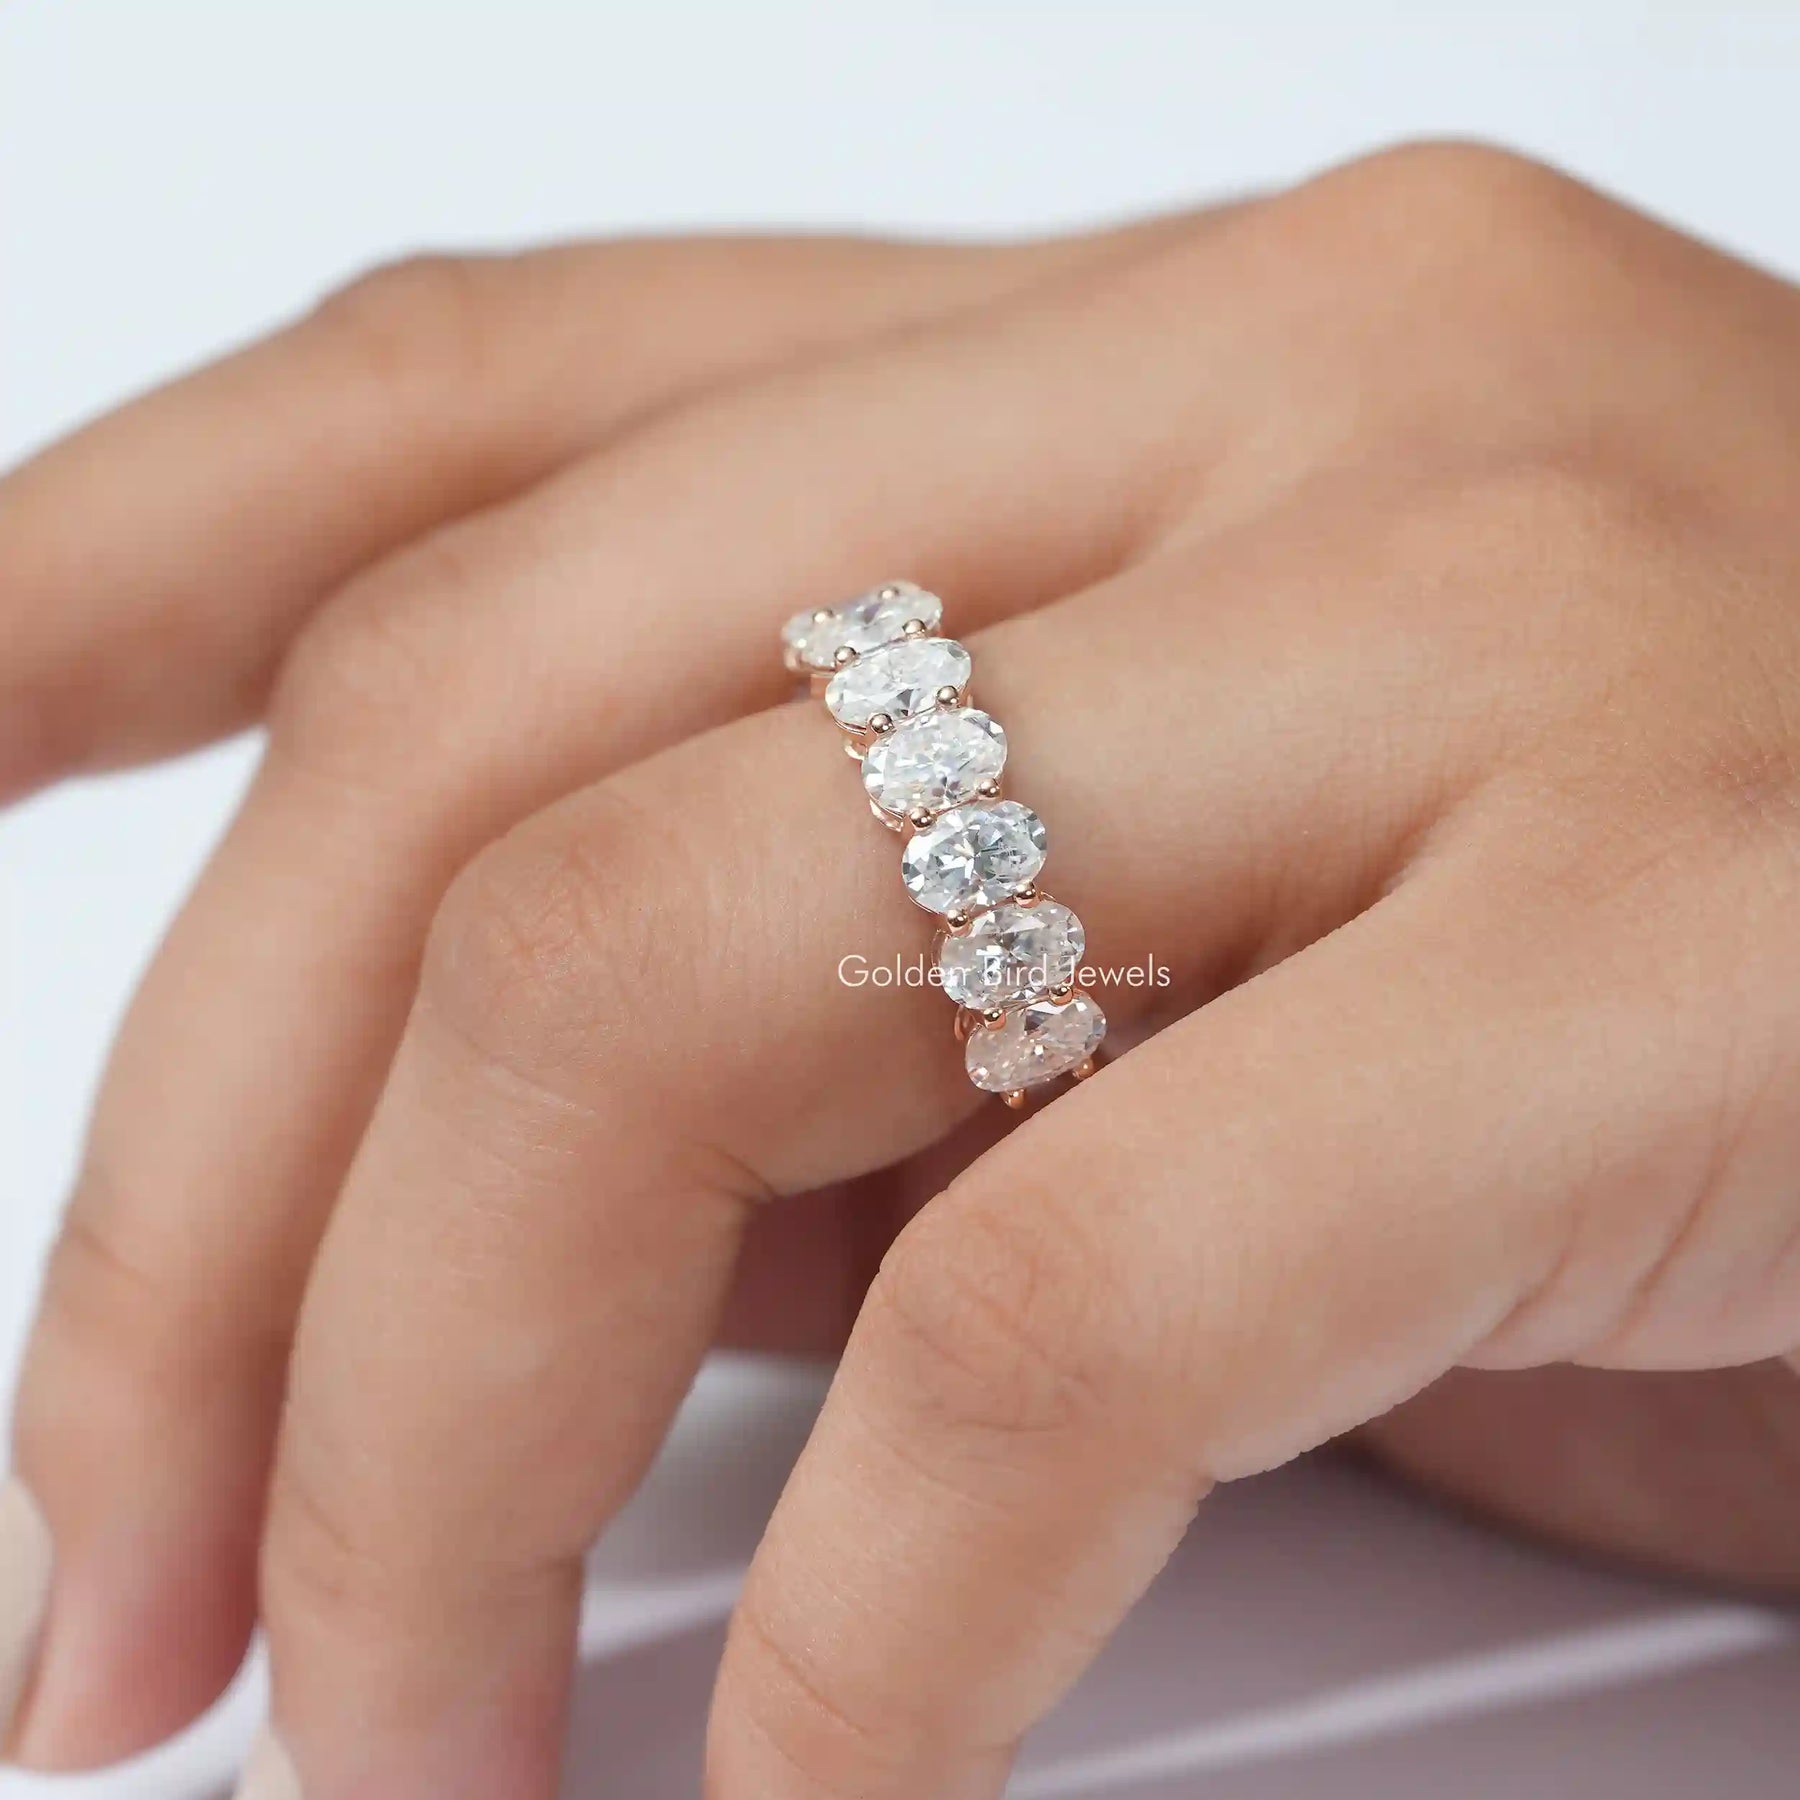 [This moissanite eternity bridal eternity band crafted with oval cut stones]